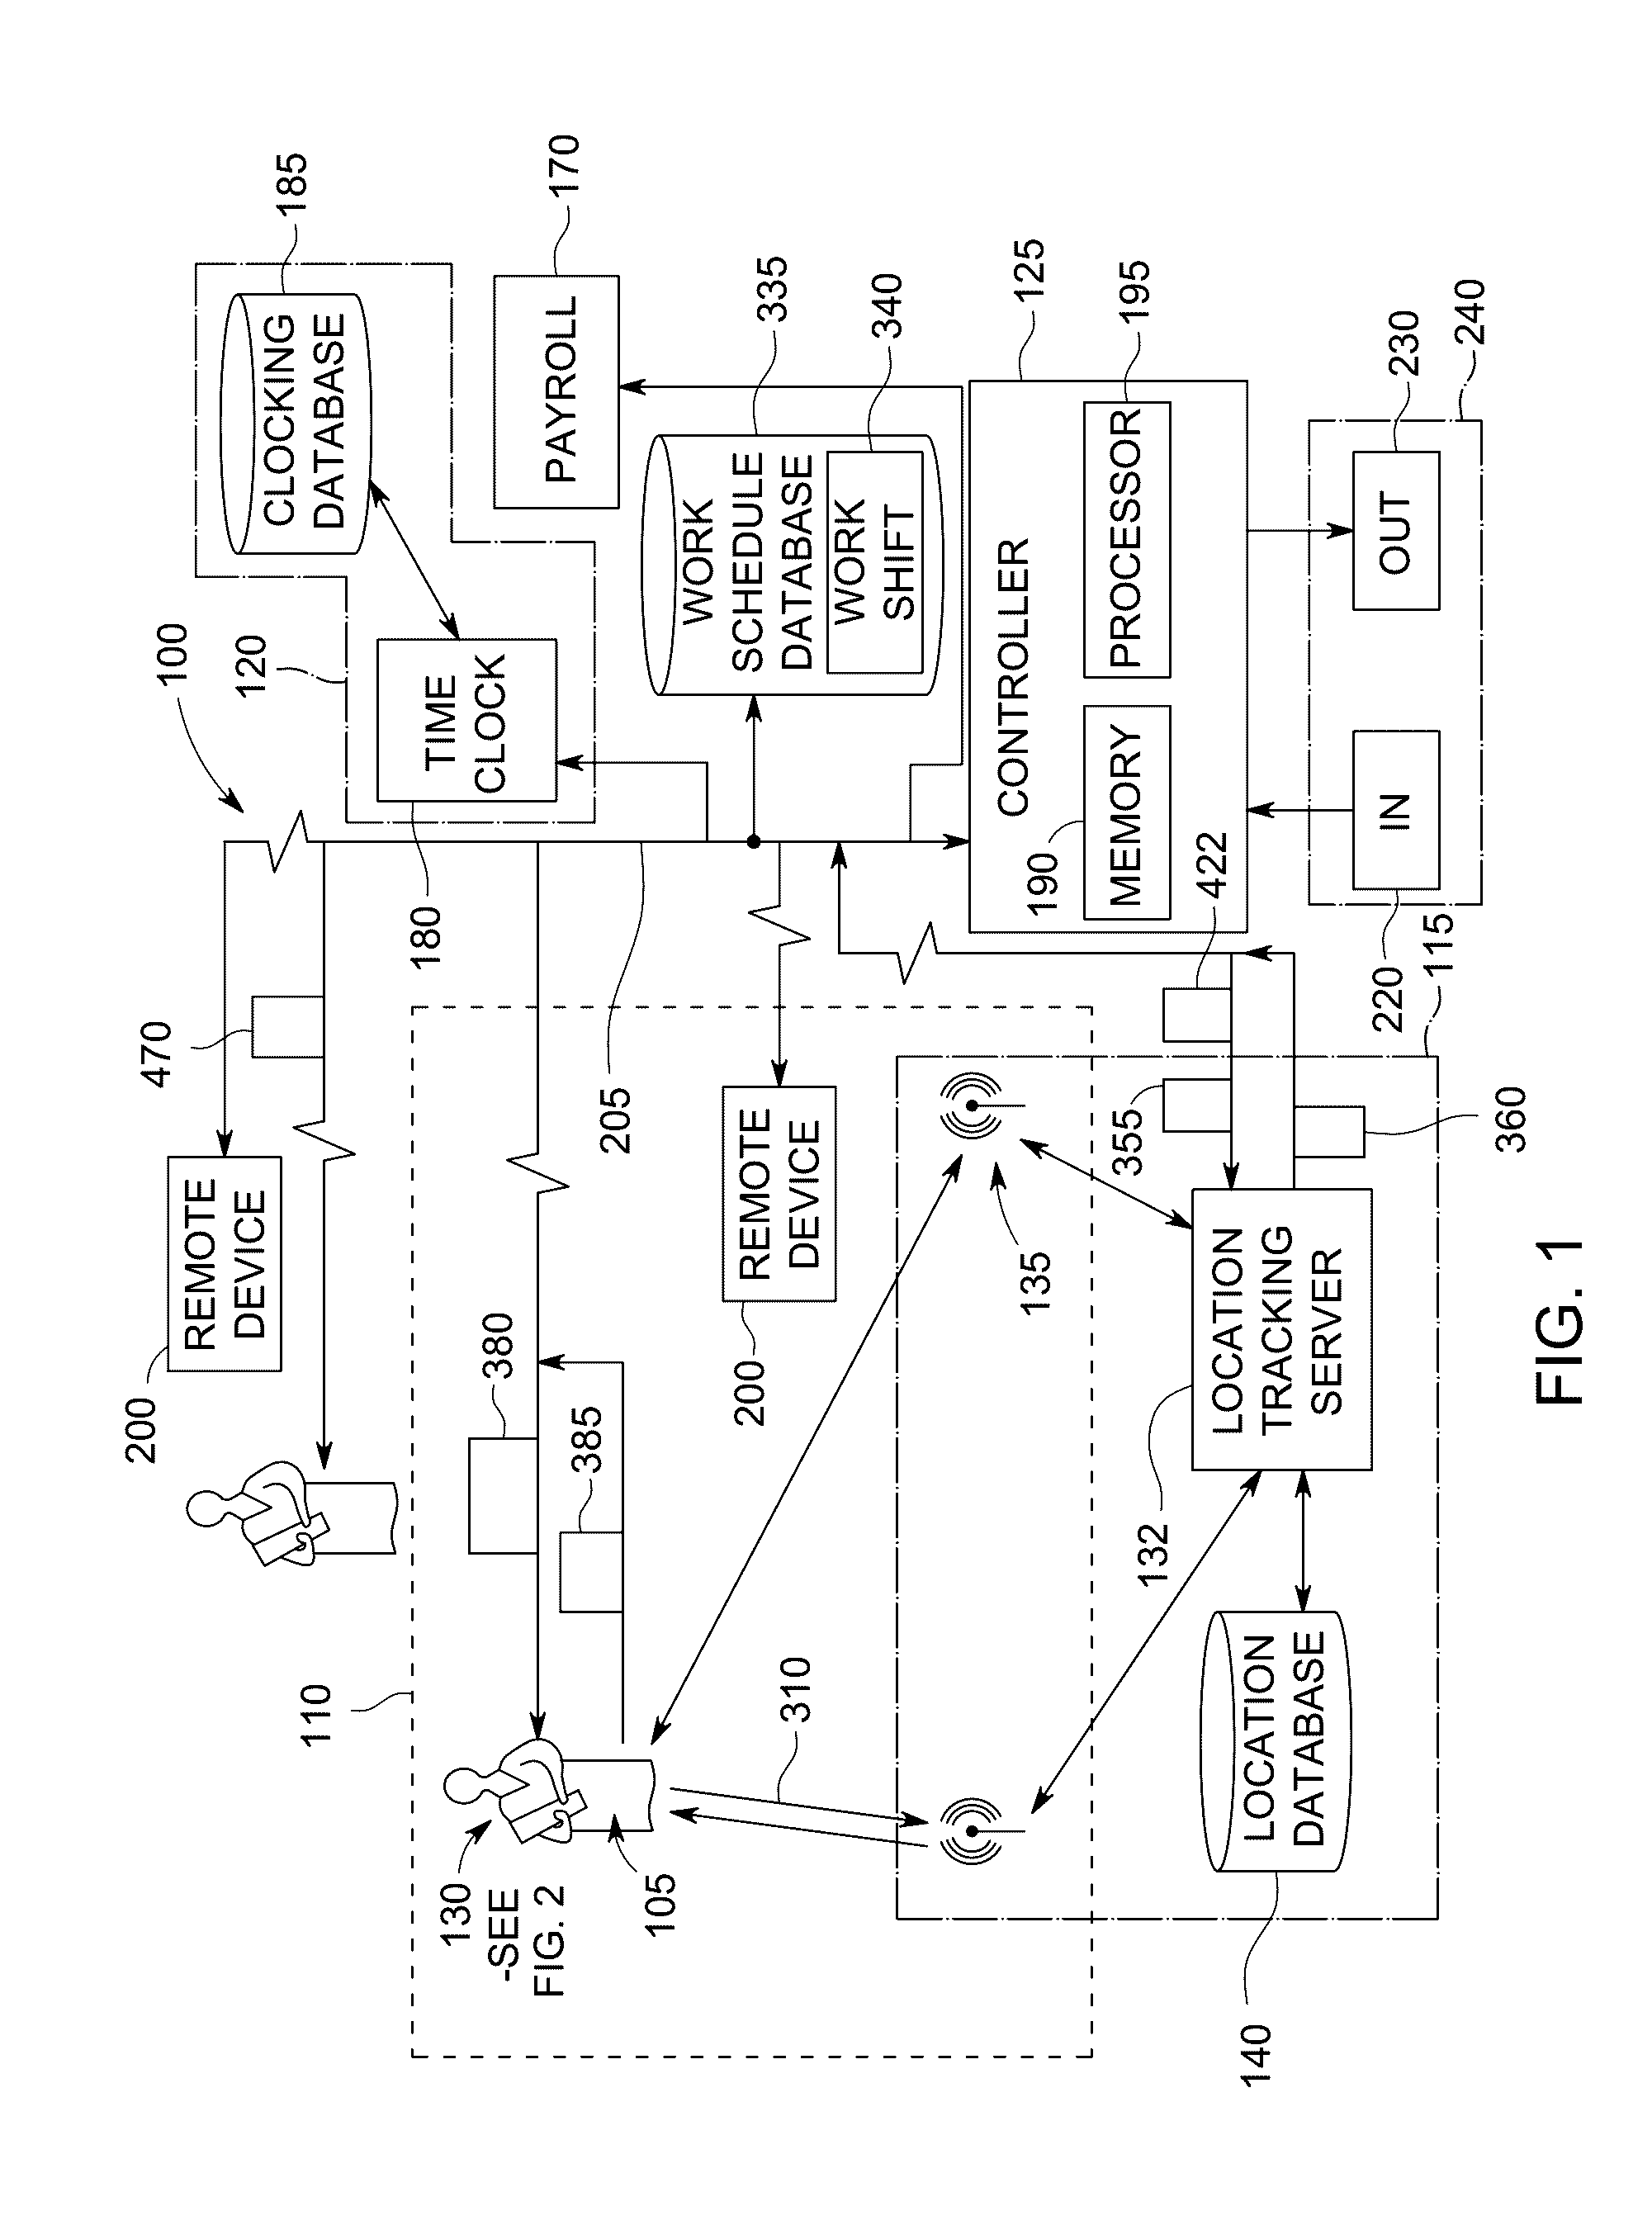 System and method to track time & attendance of an individual at a workplace